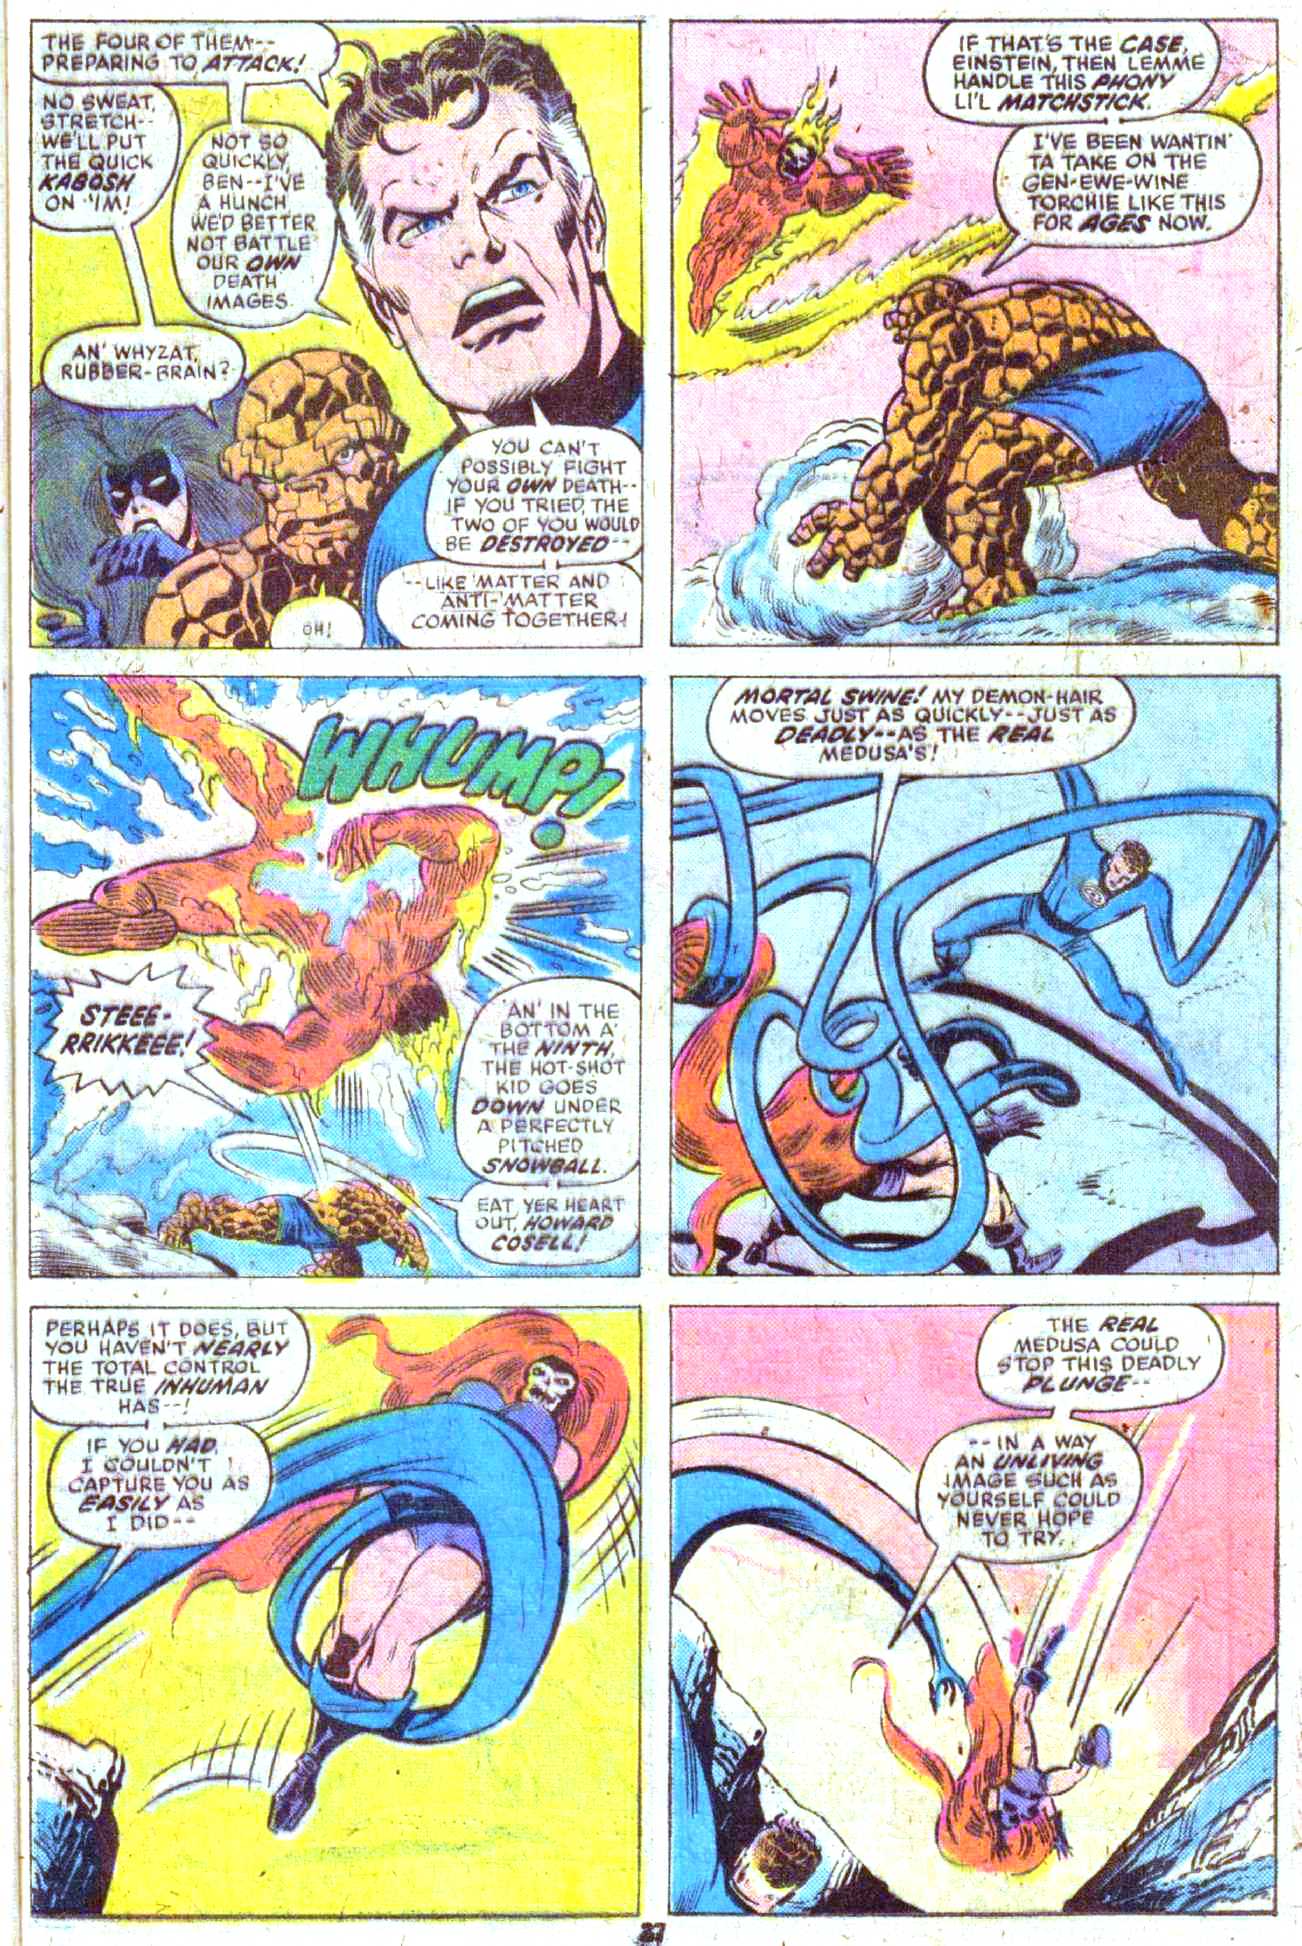 Read online Giant-Size Fantastic Four comic -  Issue #3 - 38